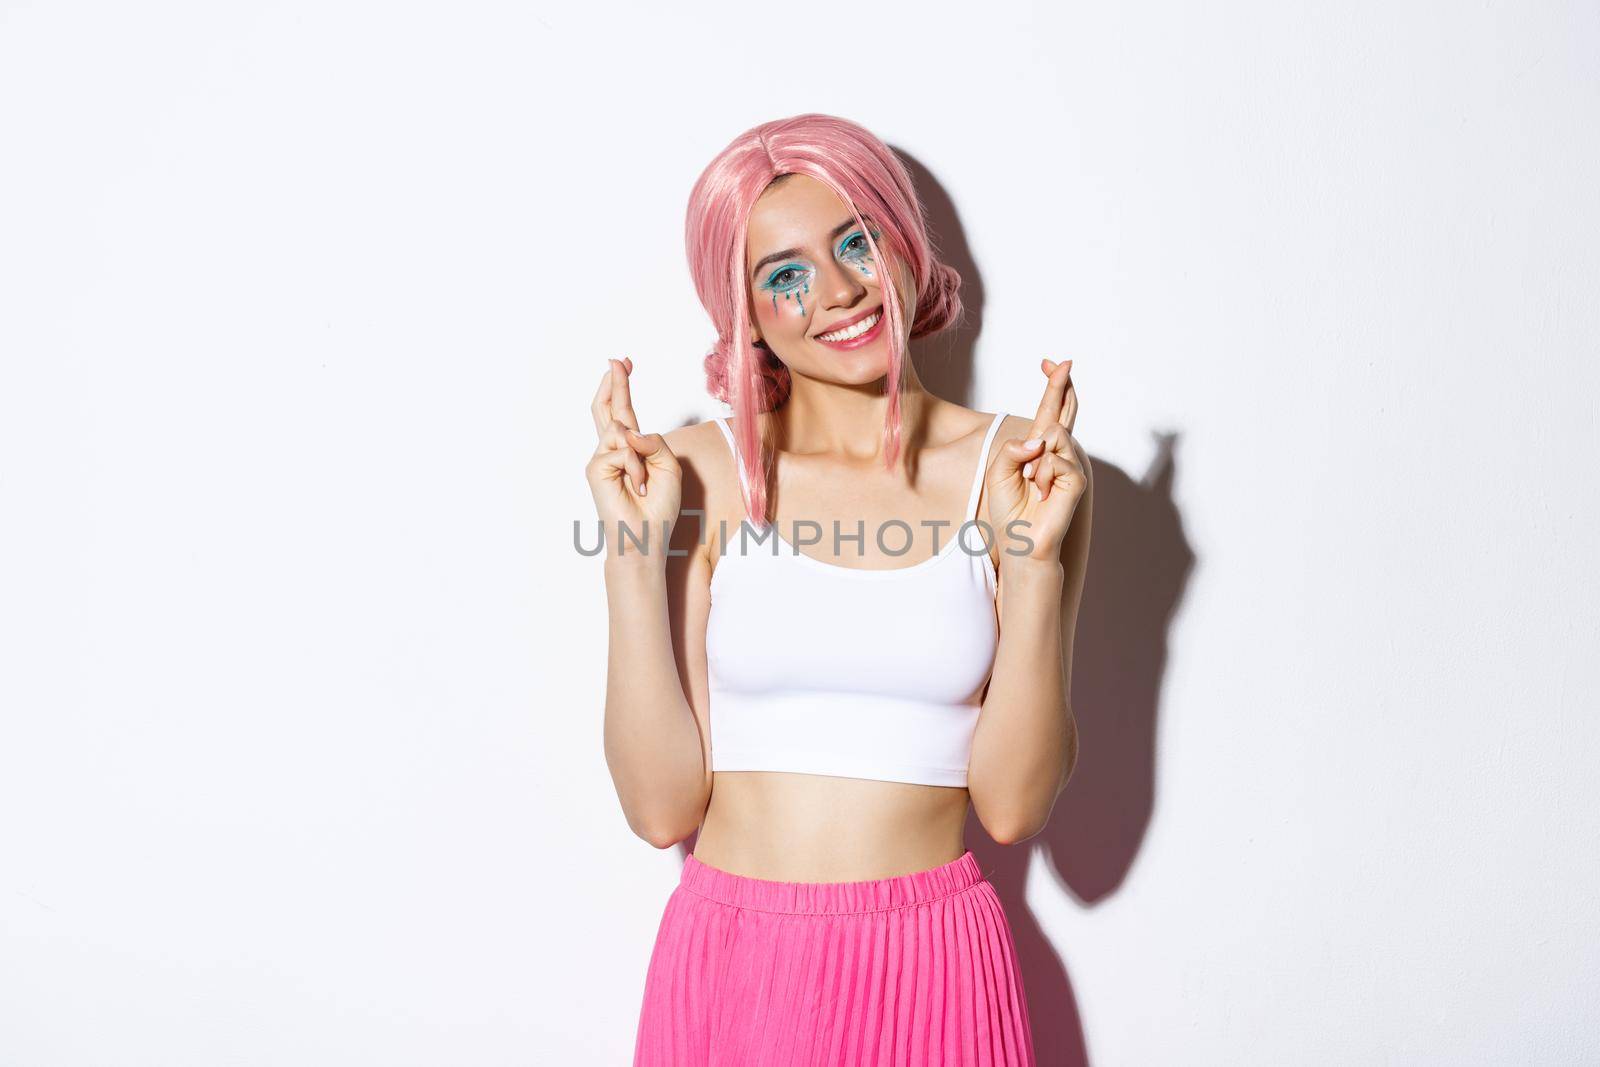 Portrait of lovely smiling woman in halloween costume, pink wig and bright makeup, looking hopeful at camera and making wish with fingers crossed.